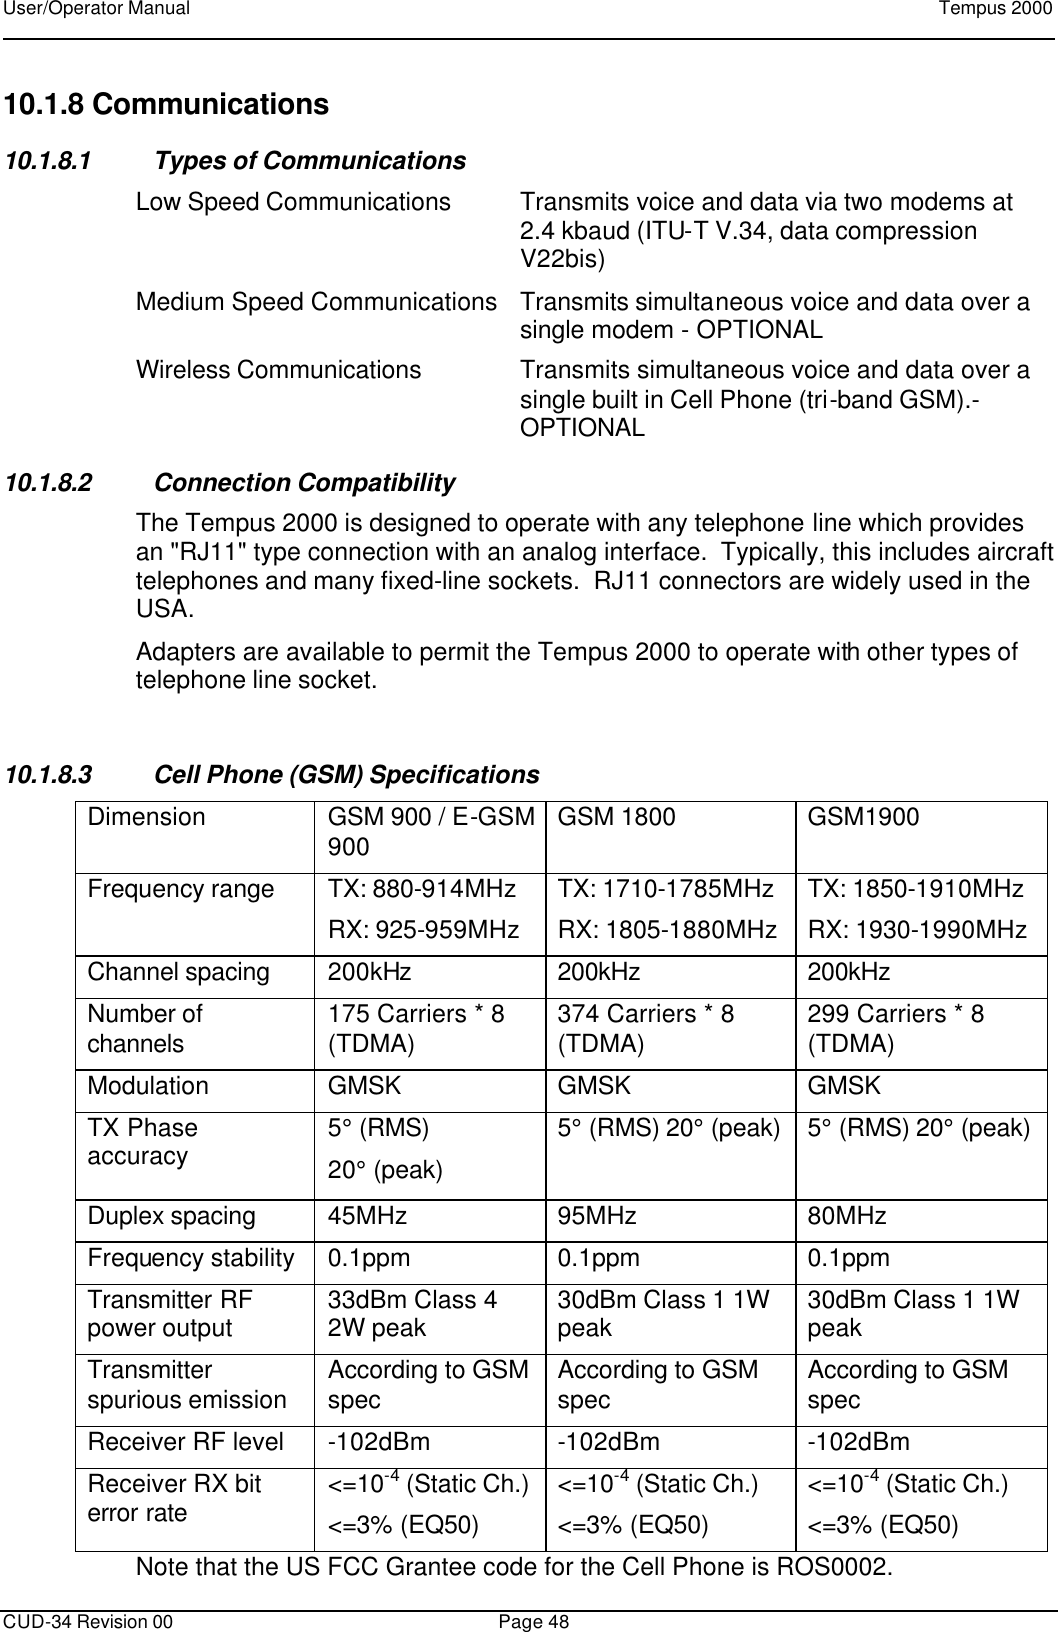 User/Operator Manual    Tempus 2000      CUD-34 Revision 00 Page 48  10.1.8 Communications  10.1.8.1 Types of Communications Low Speed Communications Transmits voice and data via two modems at 2.4 kbaud (ITU-T V.34, data compression V22bis) Medium Speed Communications  Transmits simultaneous voice and data over a single modem - OPTIONAL Wireless Communications Transmits simultaneous voice and data over a single built in Cell Phone (tri-band GSM).- OPTIONAL 10.1.8.2 Connection Compatibility The Tempus 2000 is designed to operate with any telephone line which provides an &quot;RJ11&quot; type connection with an analog interface.  Typically, this includes aircraft telephones and many fixed-line sockets.  RJ11 connectors are widely used in the USA. Adapters are available to permit the Tempus 2000 to operate with other types of telephone line socket.  10.1.8.3 Cell Phone (GSM) Specifications Dimension GSM 900 / E-GSM 900 GSM 1800 GSM1900 Frequency range TX: 880-914MHz RX: 925-959MHz TX: 1710-1785MHz RX: 1805-1880MHz TX: 1850-1910MHz RX: 1930-1990MHz Channel spacing 200kHz 200kHz 200kHz Number of channels 175 Carriers * 8 (TDMA) 374 Carriers * 8 (TDMA) 299 Carriers * 8 (TDMA) Modulation GMSK GMSK GMSK TX Phase accuracy 5° (RMS)  20° (peak) 5° (RMS) 20° (peak) 5° (RMS) 20° (peak) Duplex spacing 45MHz 95MHz 80MHz Frequency stability 0.1ppm 0.1ppm 0.1ppm Transmitter RF power output 33dBm Class 4 2W peak 30dBm Class 1 1W peak 30dBm Class 1 1W peak Transmitter spurious emission According to GSM spec According to GSM spec According to GSM spec Receiver RF level -102dBm -102dBm -102dBm Receiver RX bit error rate &lt;=10-4 (Static Ch.) &lt;=3% (EQ50) &lt;=10-4 (Static Ch.) &lt;=3% (EQ50) &lt;=10-4 (Static Ch.) &lt;=3% (EQ50) Note that the US FCC Grantee code for the Cell Phone is ROS0002. 